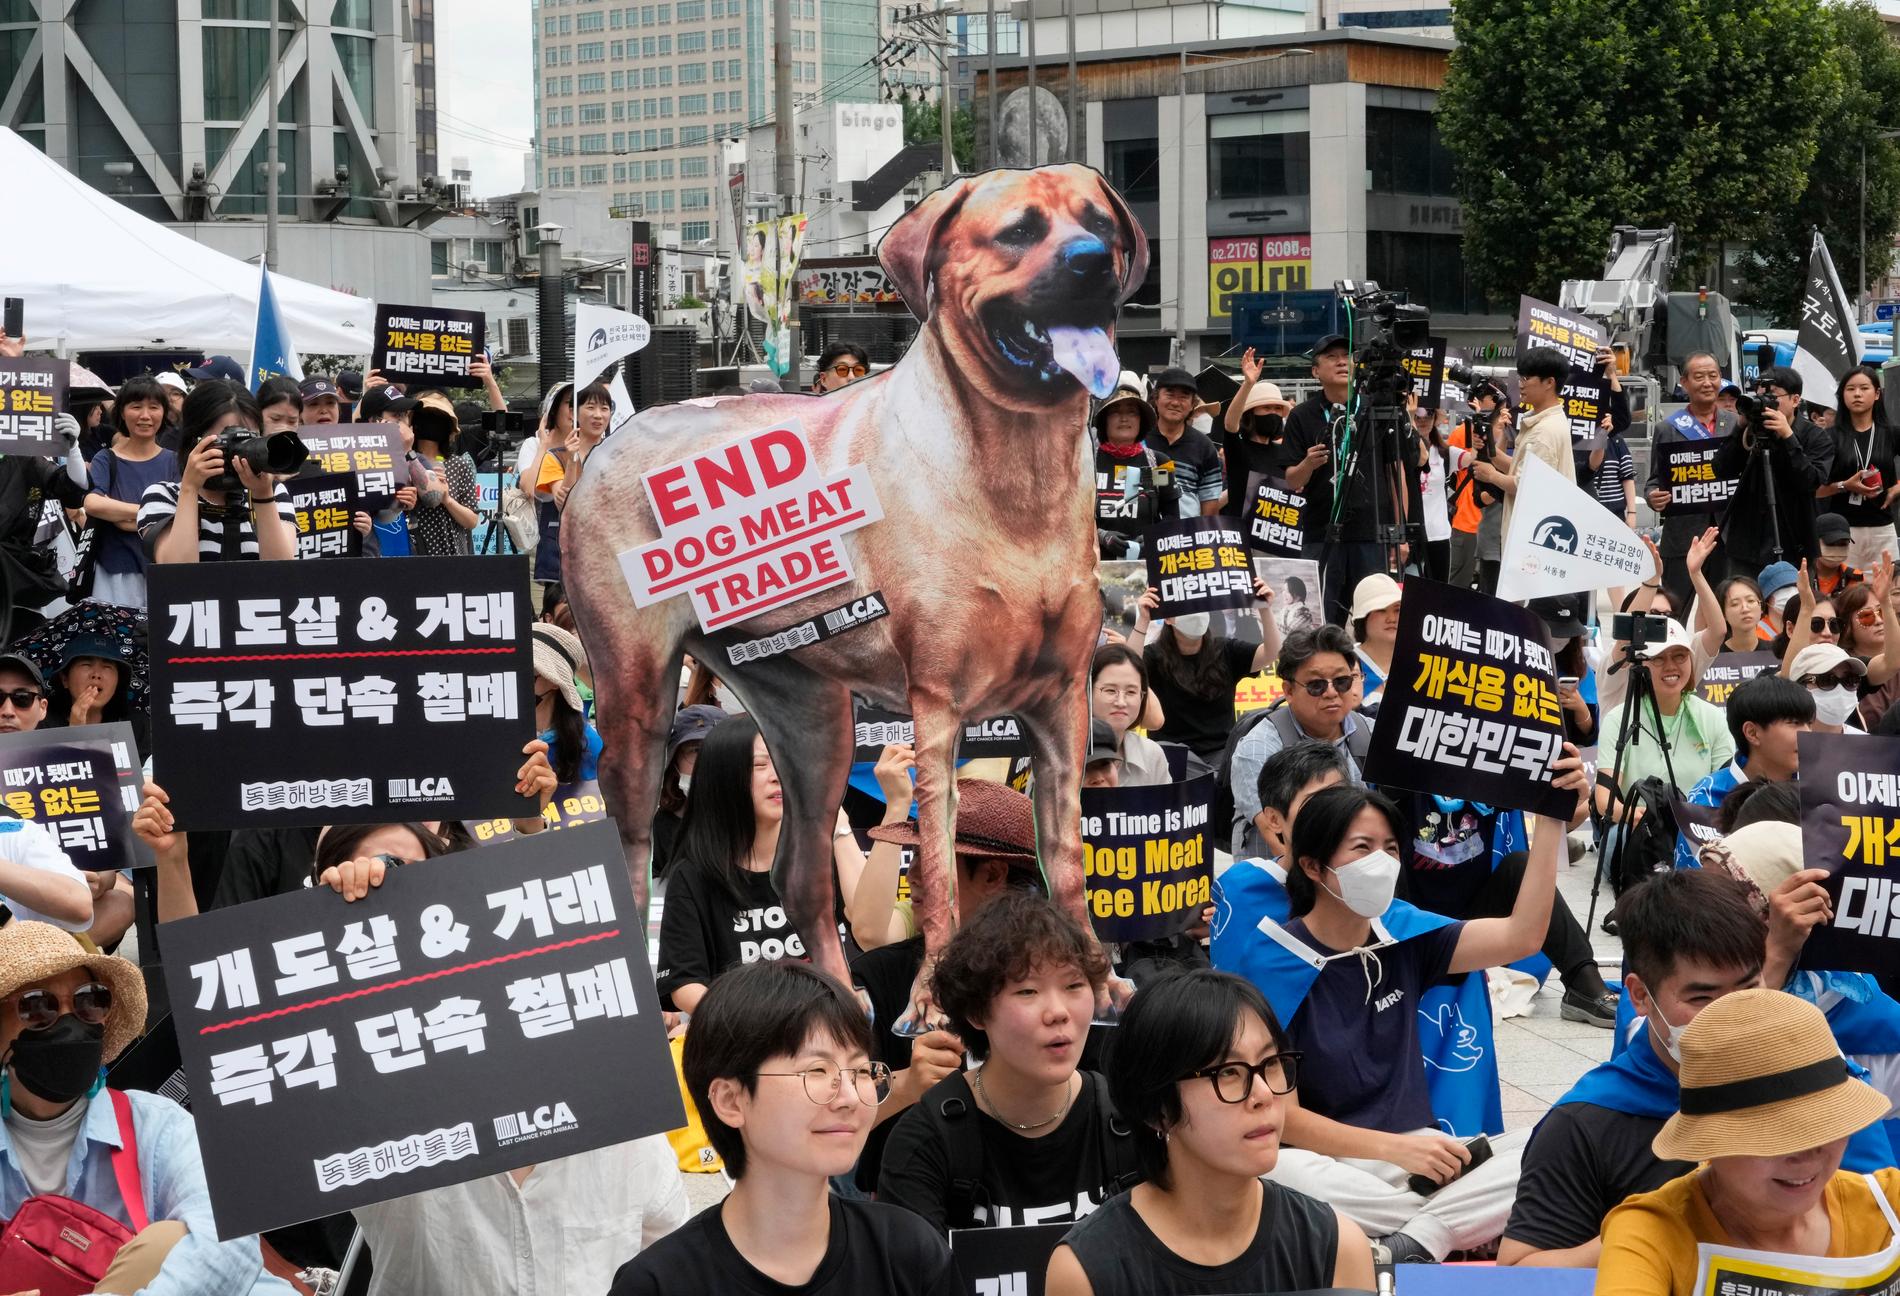 South Korea bans the dog meat industry